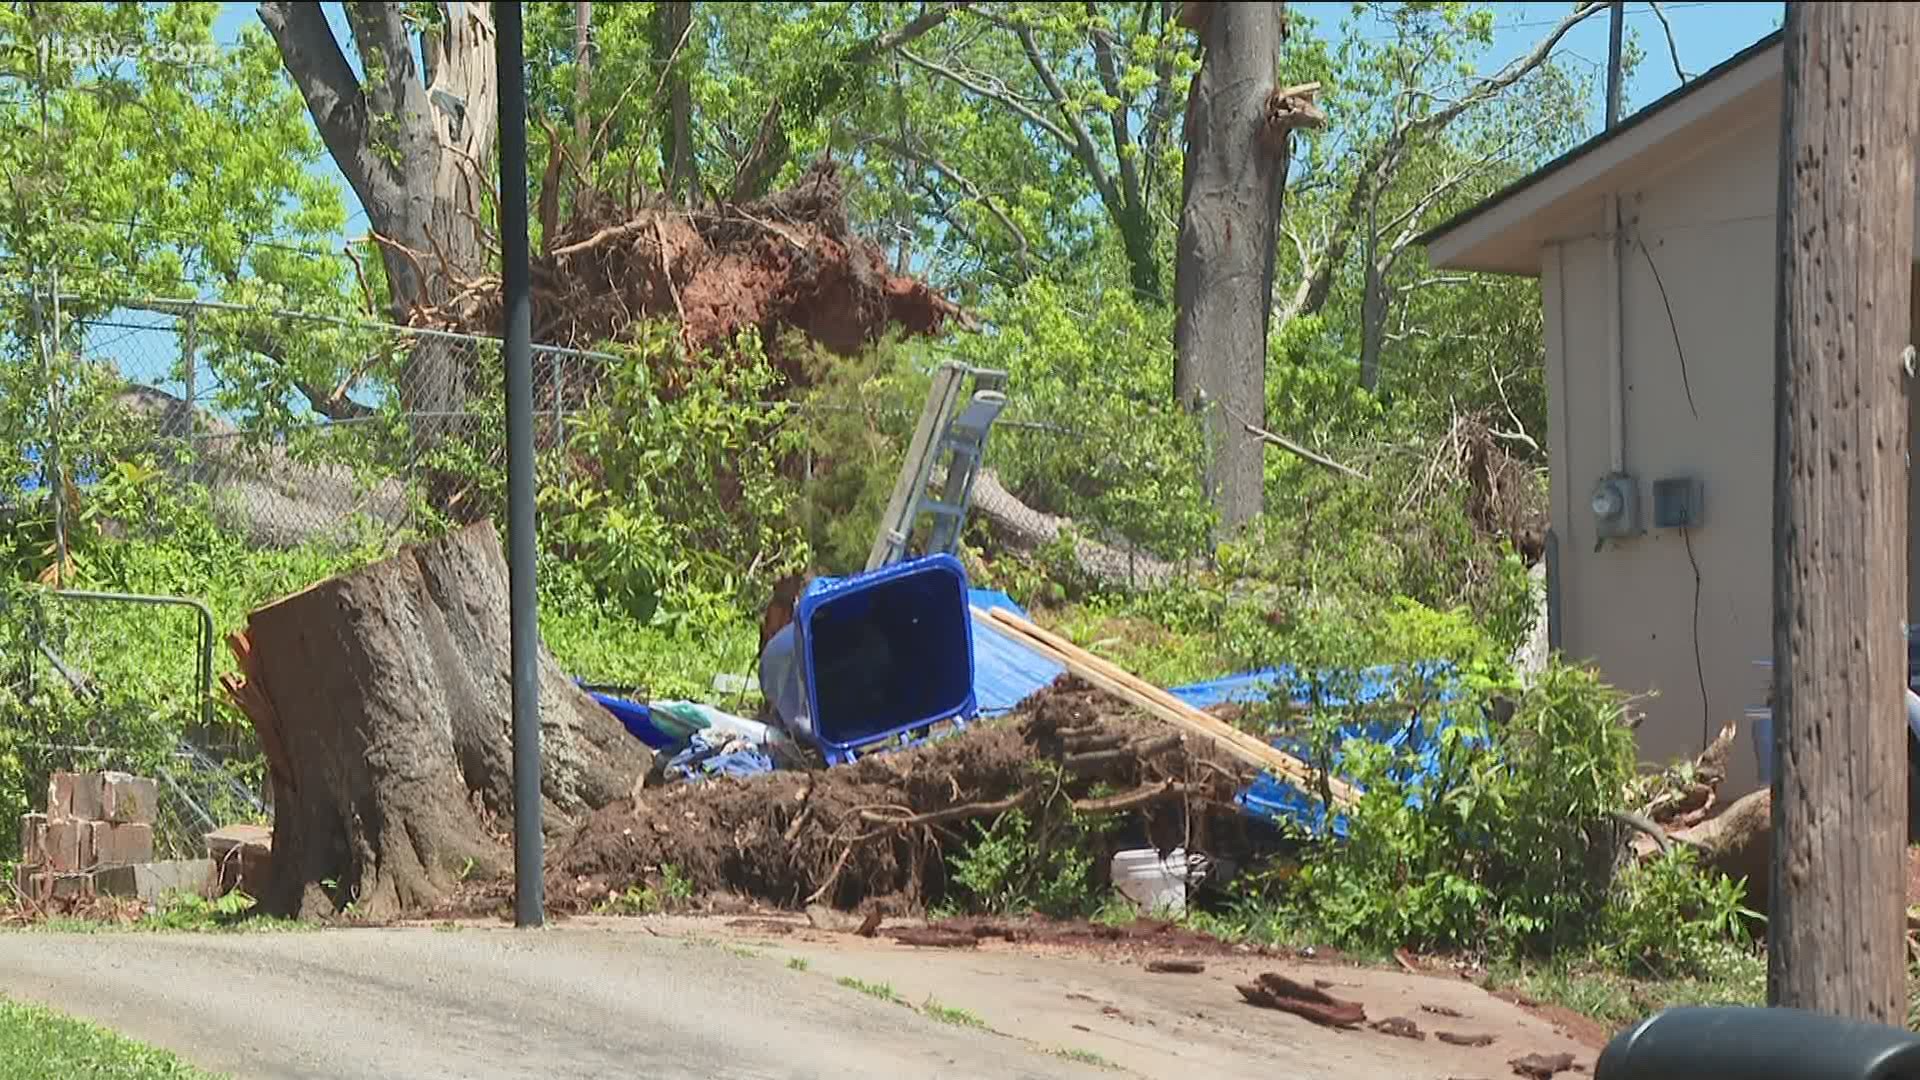 The damage right after an EF-4 tornado hit Newnan was devastating, six weeks later the efforts to rebuild are well underway.